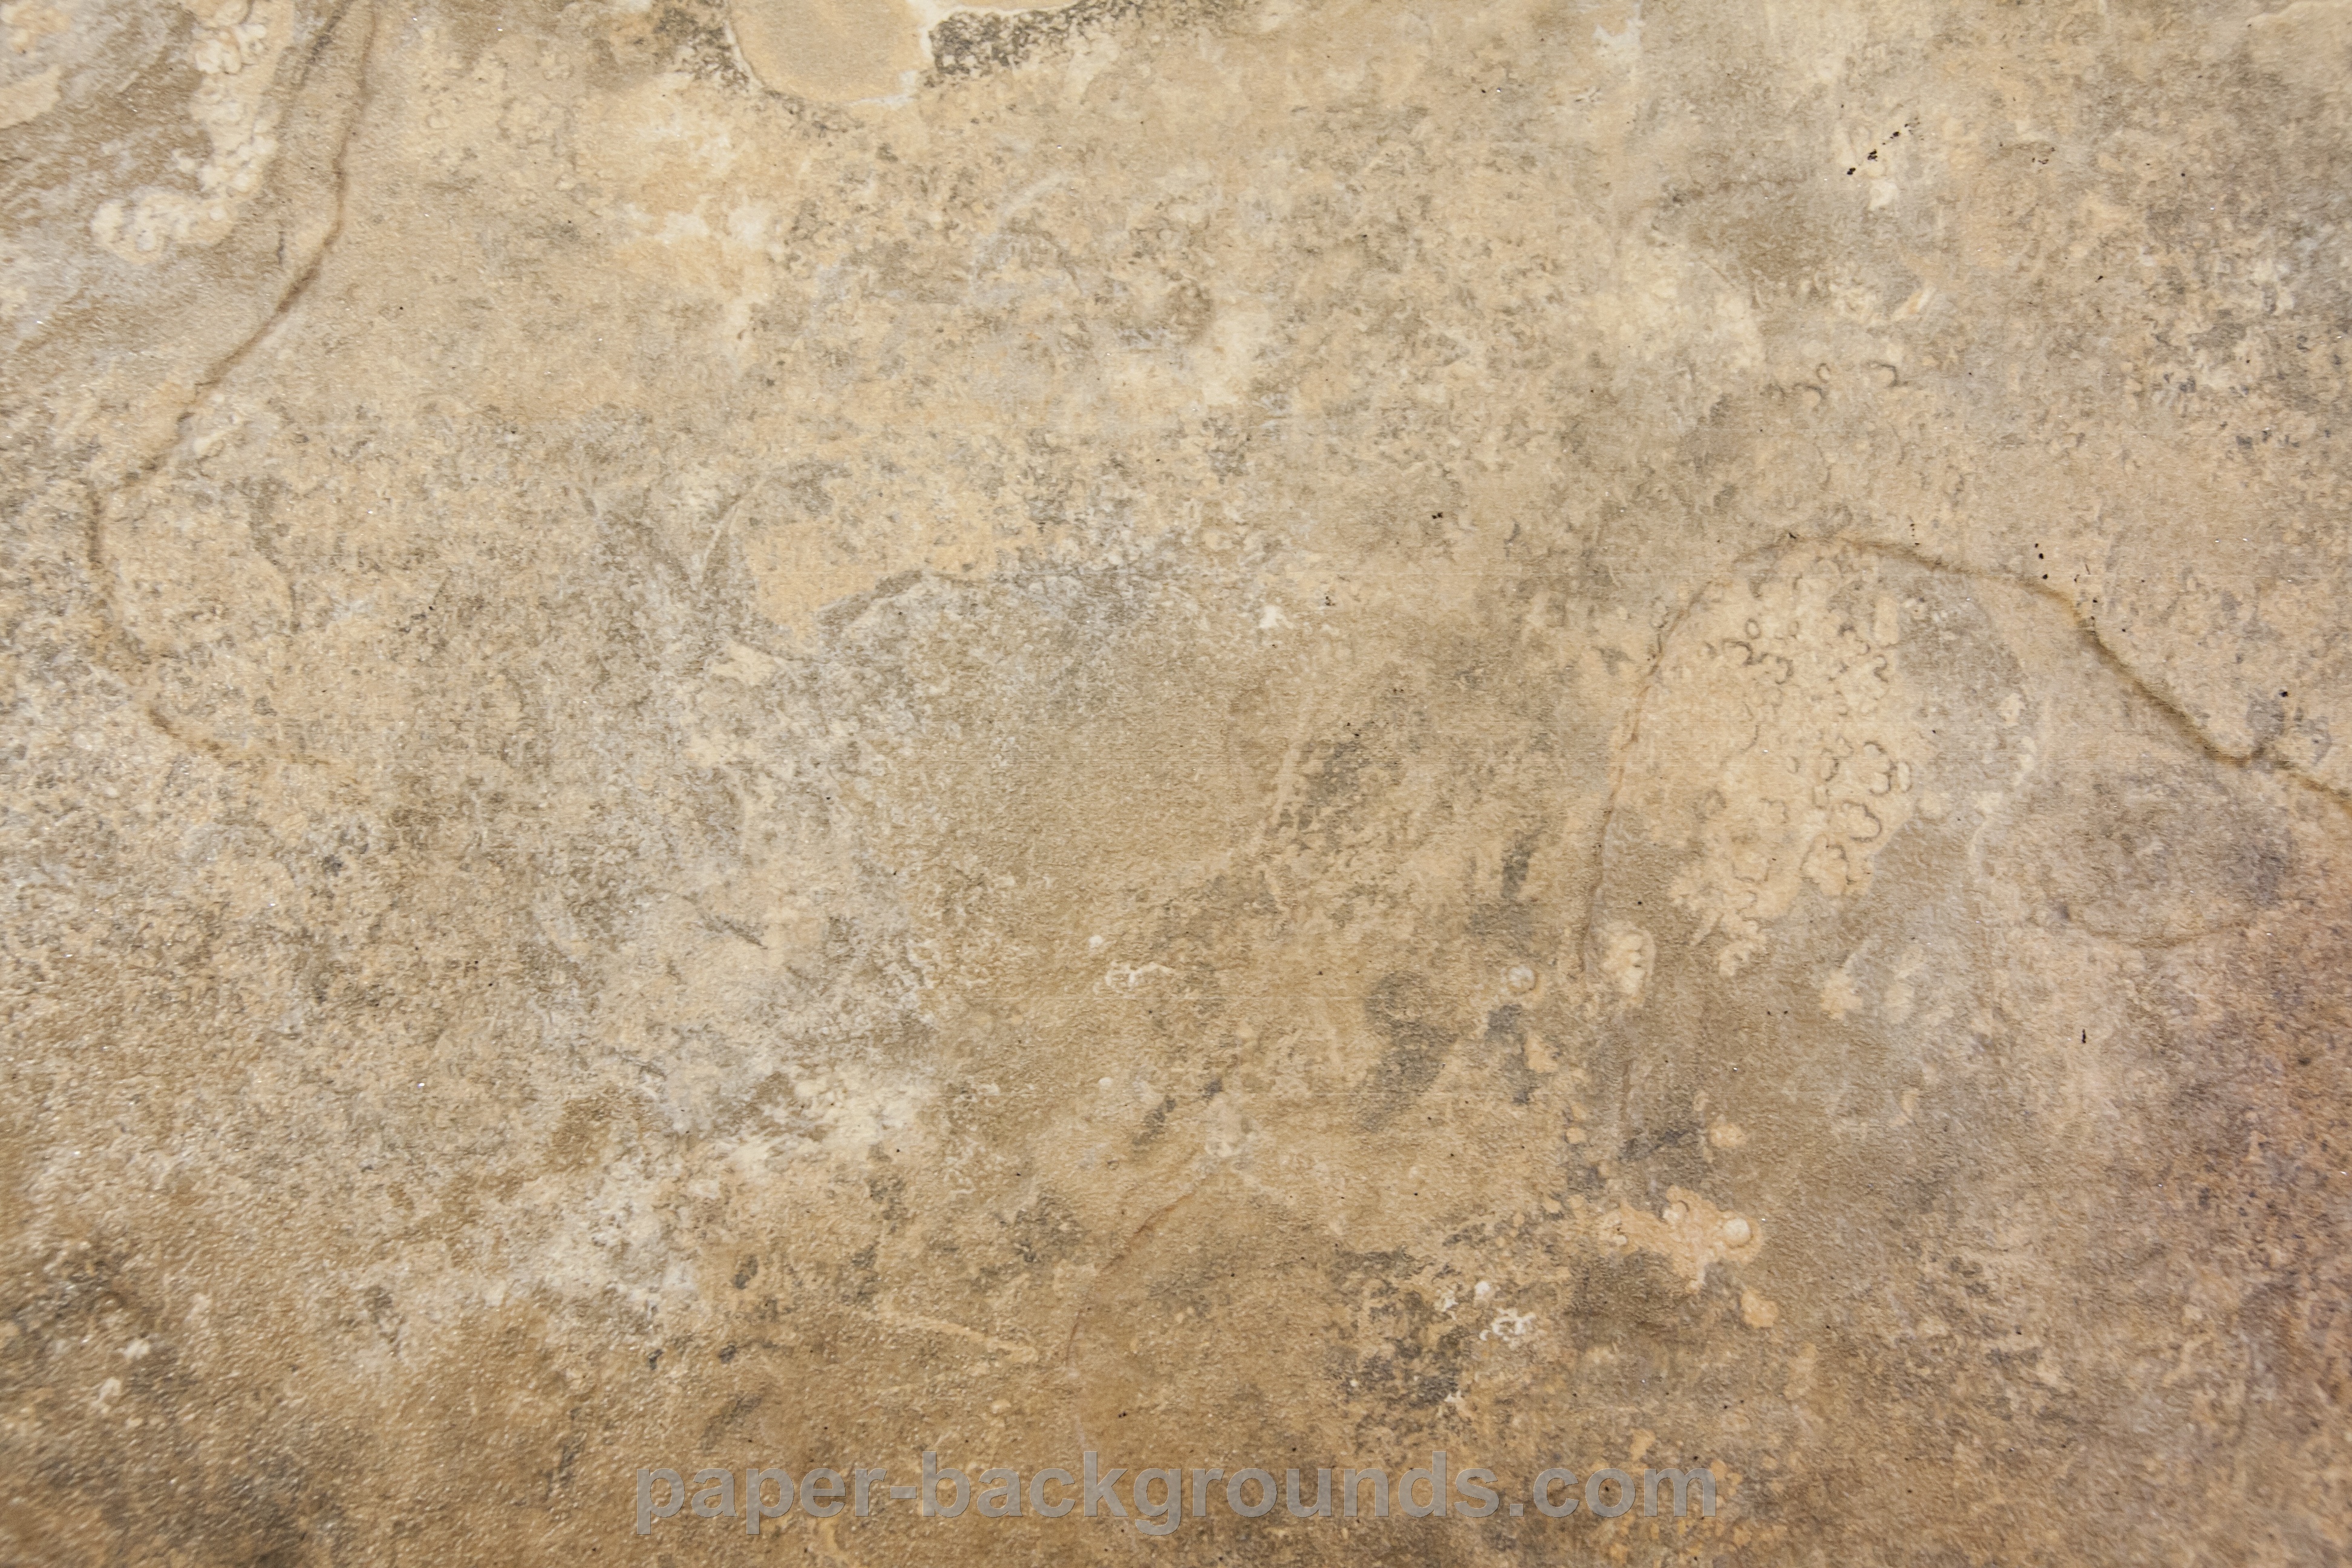 Brown Marble Texture Background